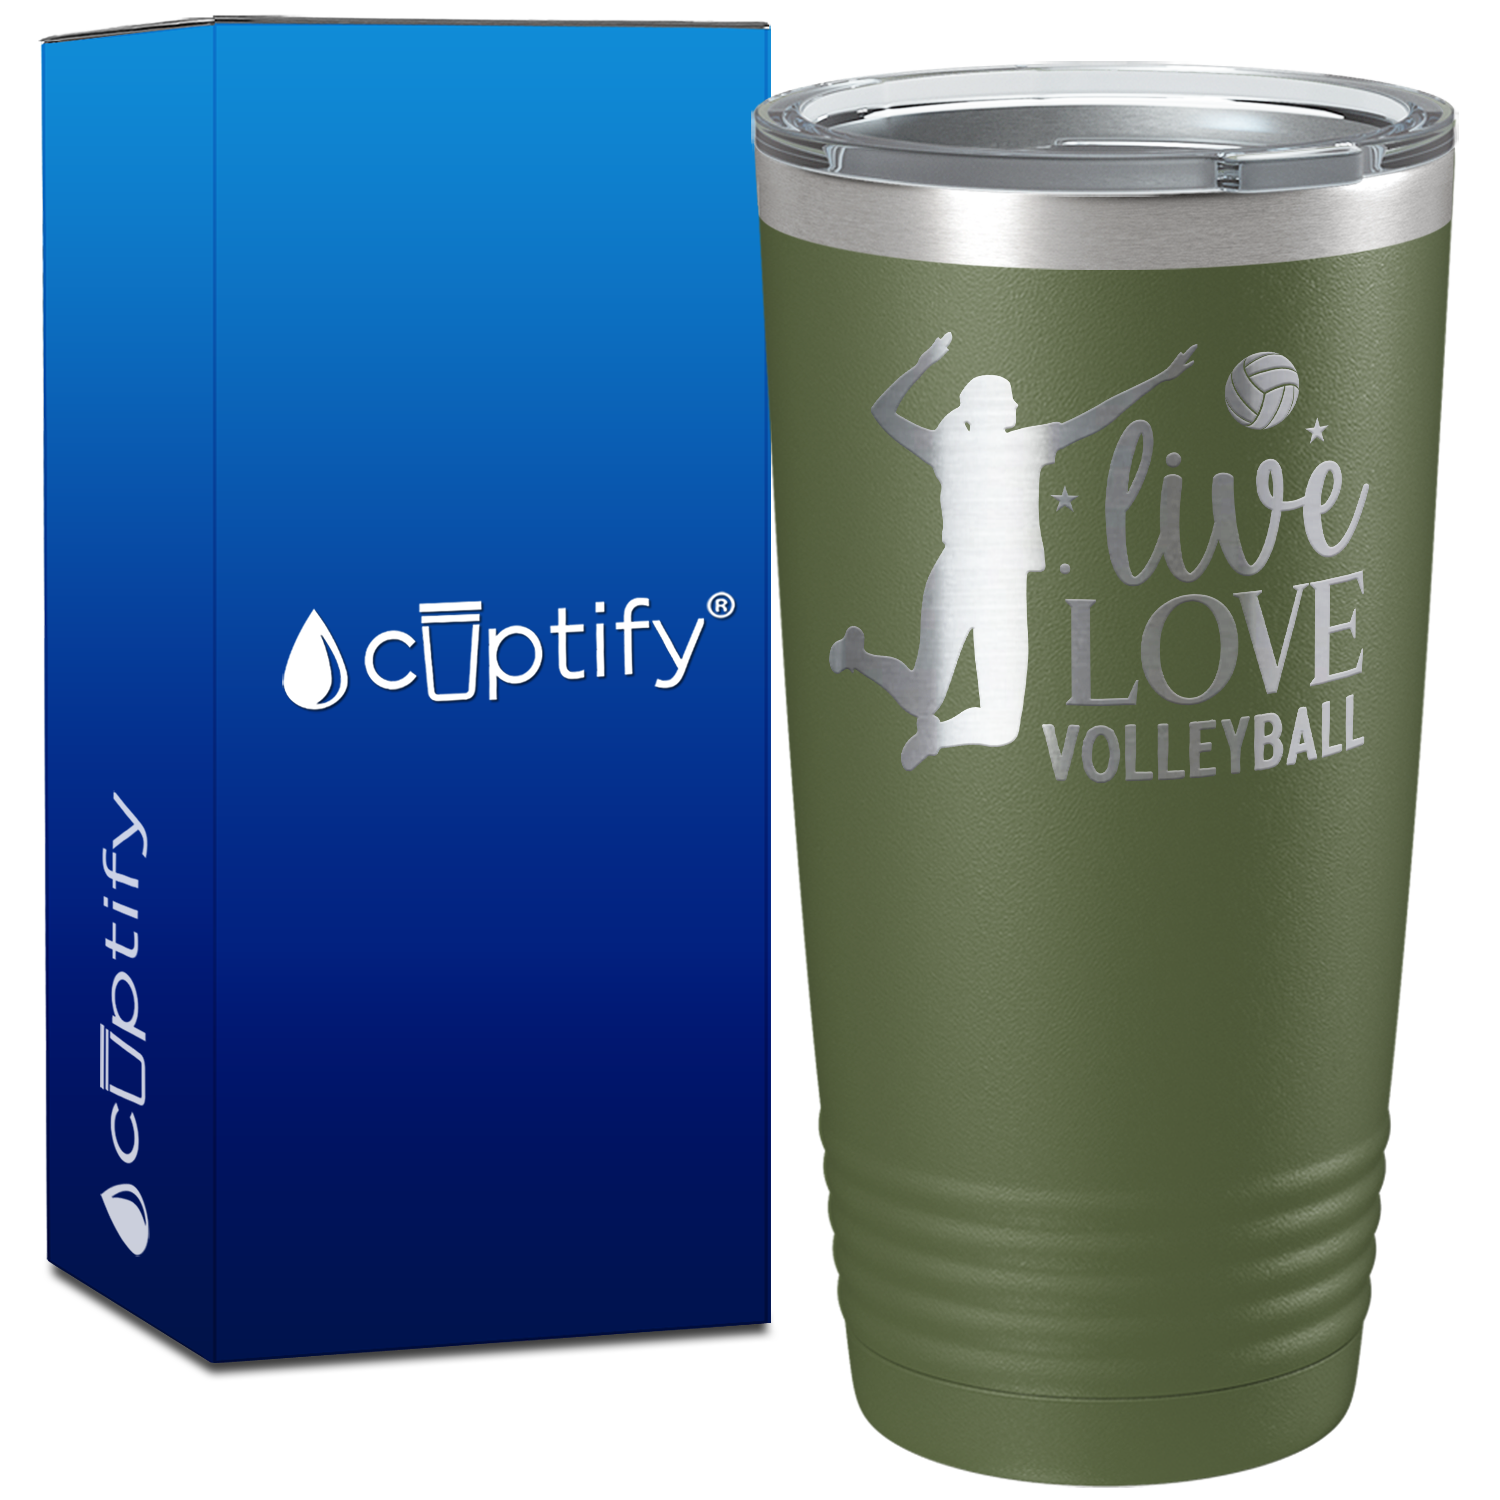 Live Love Volleyball with Player on 20oz Volleyball Tumbler